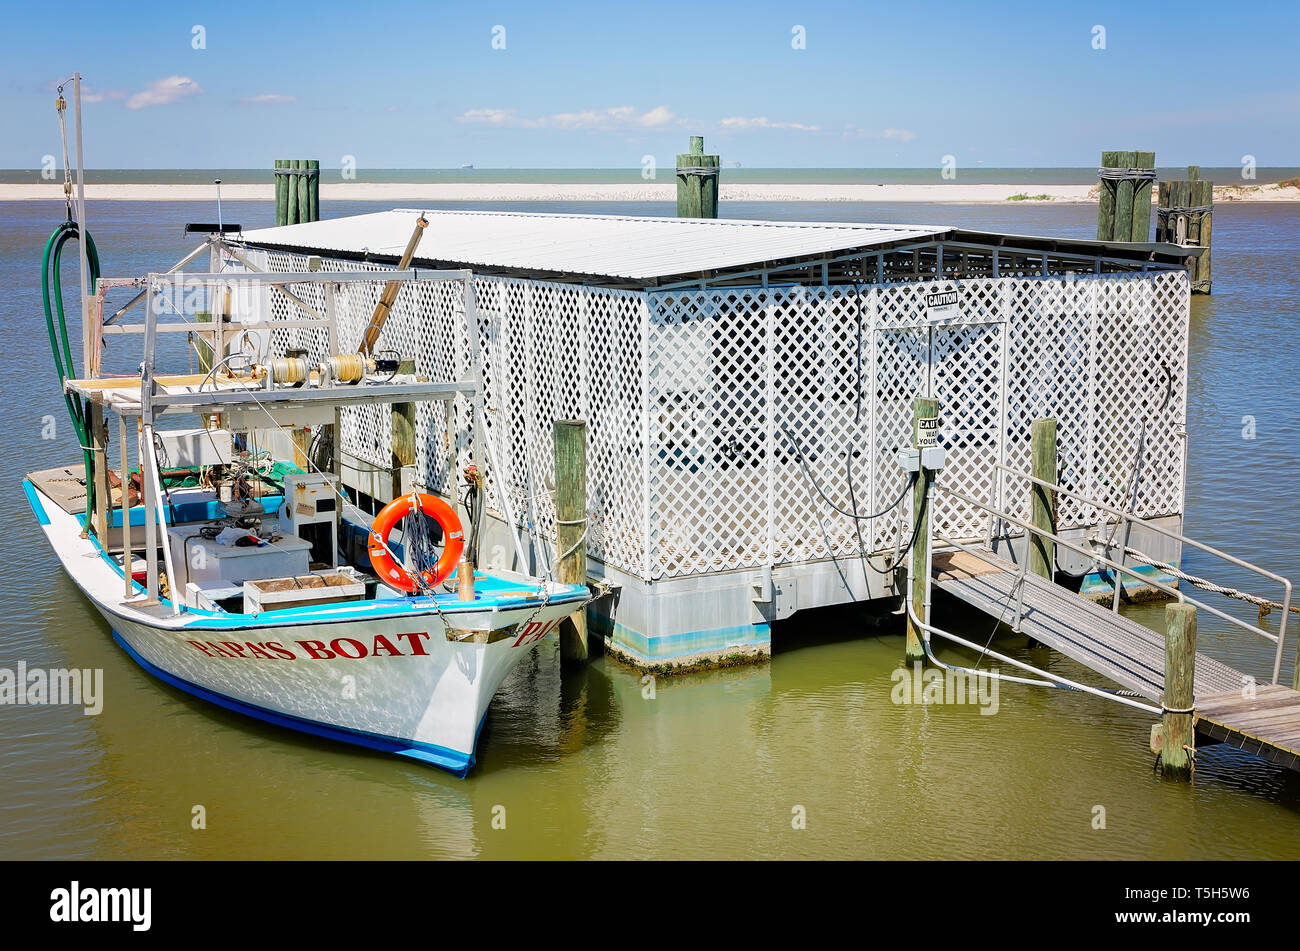 Papa’s Boat, a commercial fishing vessel, is docked, April 14, 2019, in Dauphin Island, Alabama. Stock Photo